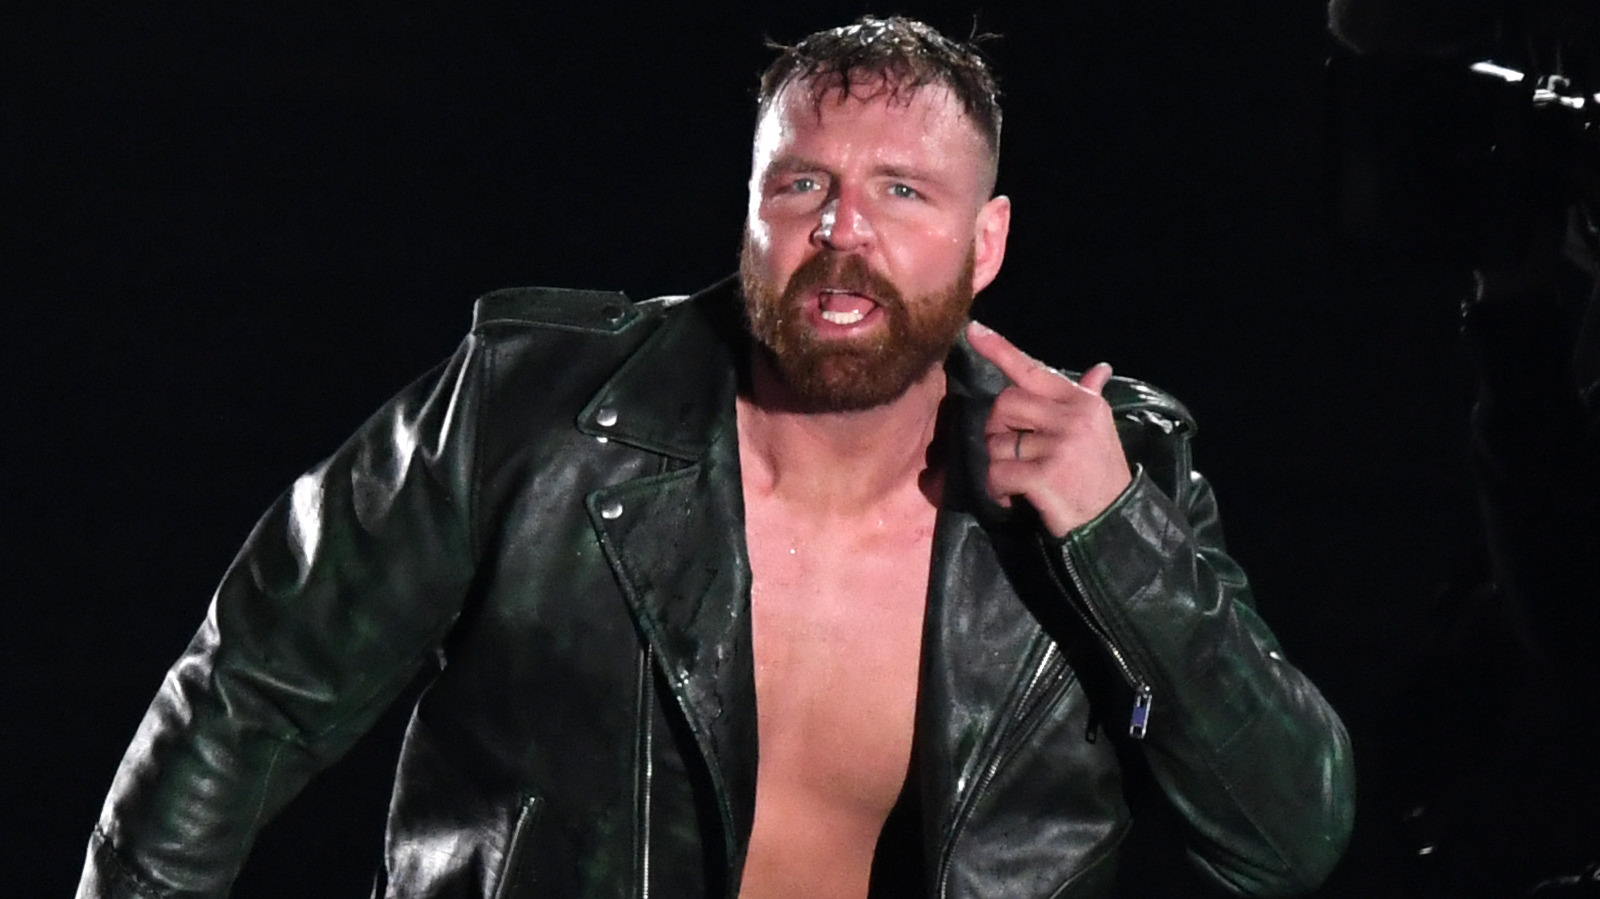 Jon Moxley Makes His Presence Felt Following World Tag Title Match On AEW Collision